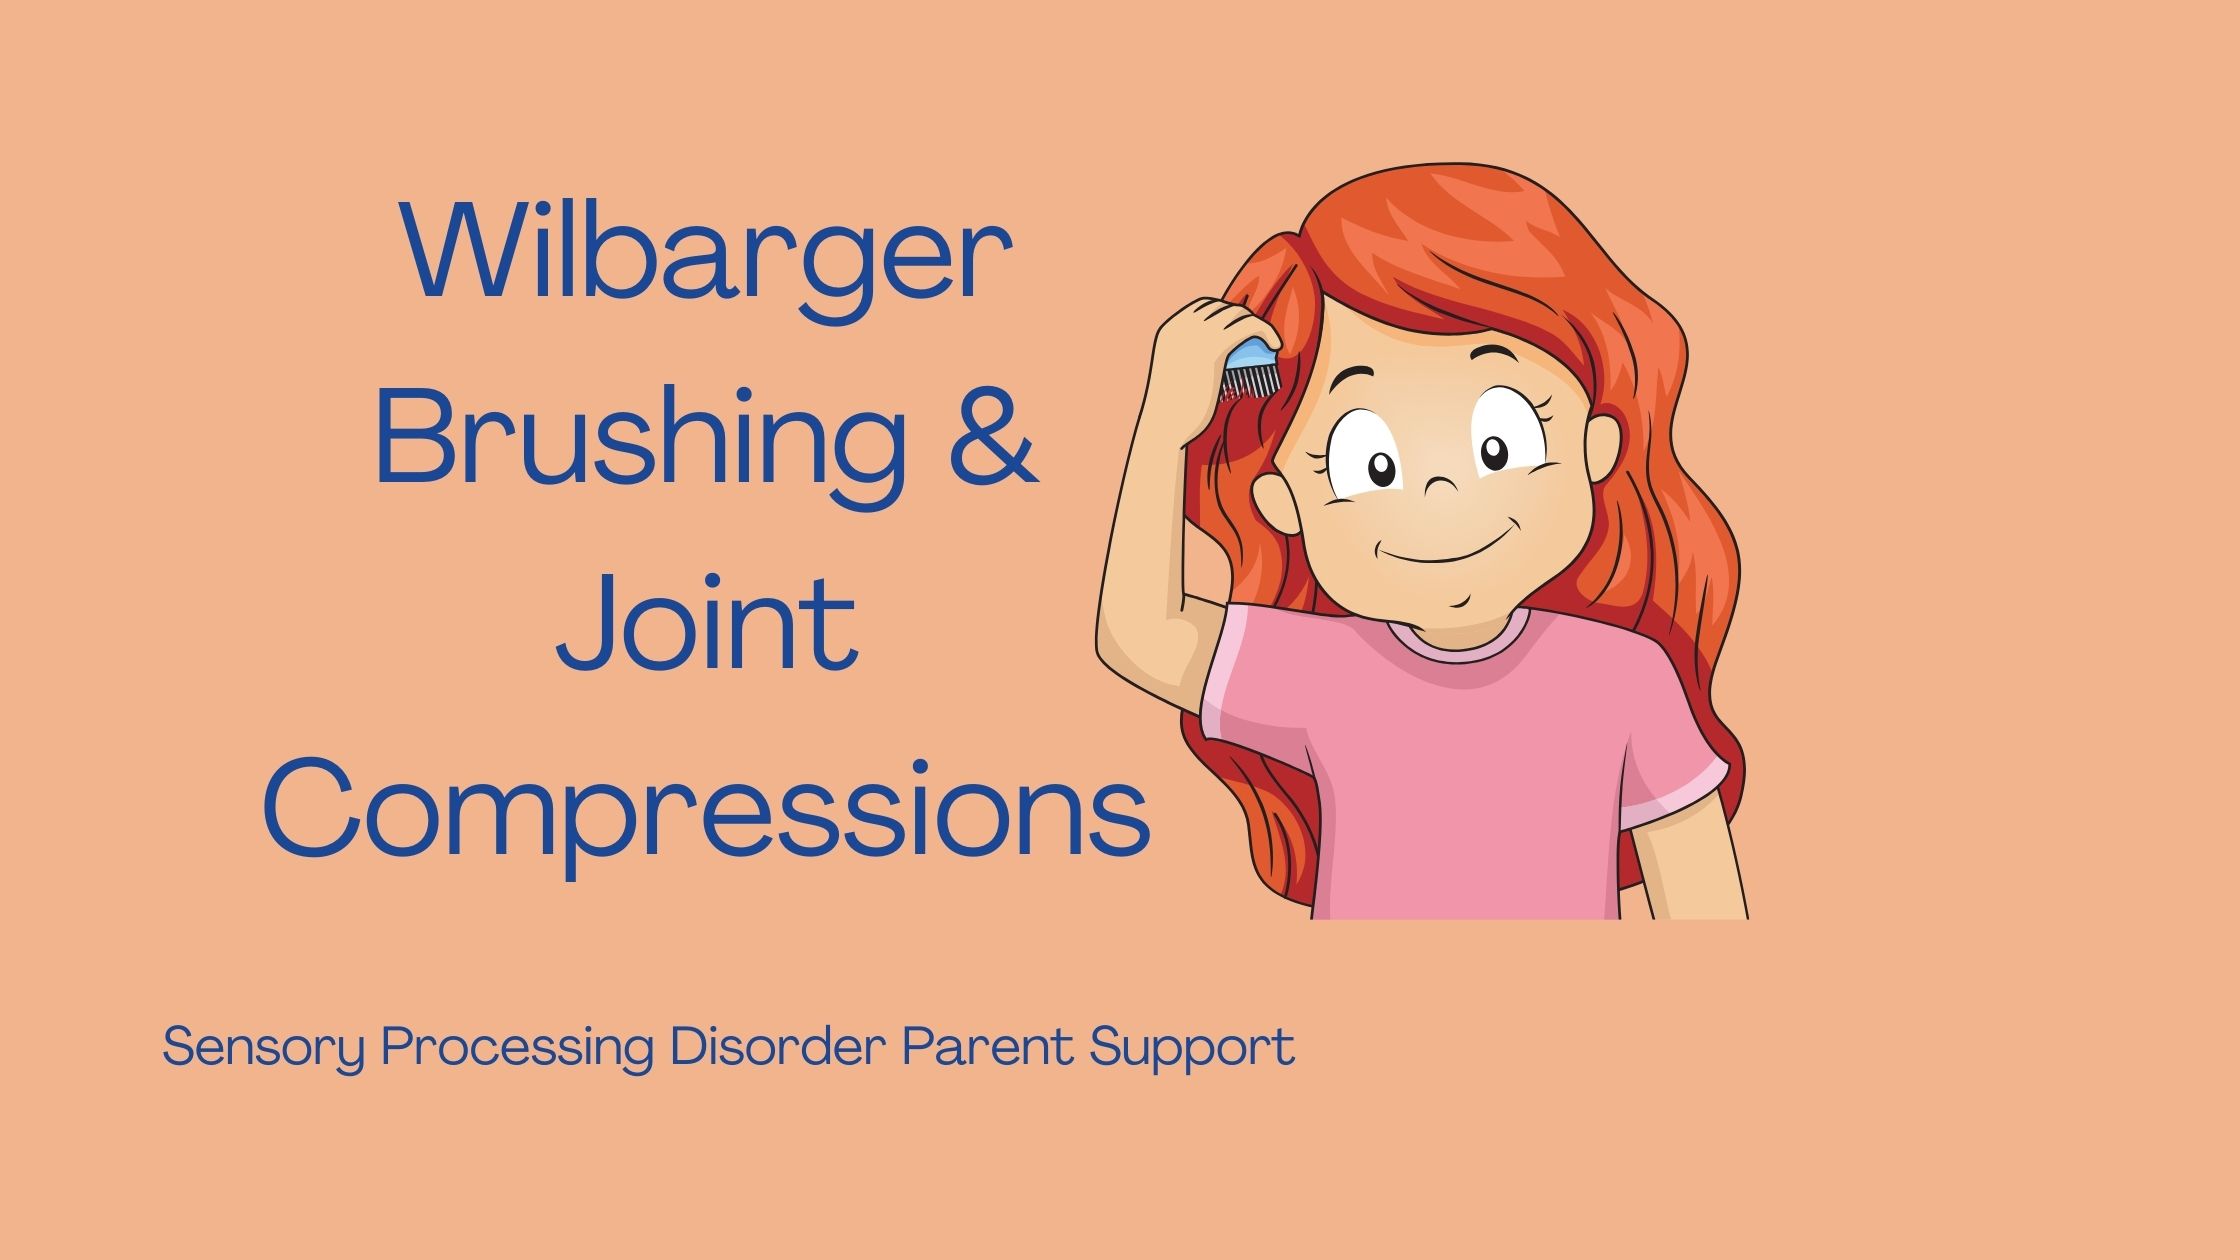 child with sensory processing brushing Wilbarger Brushing & Joint Compressions